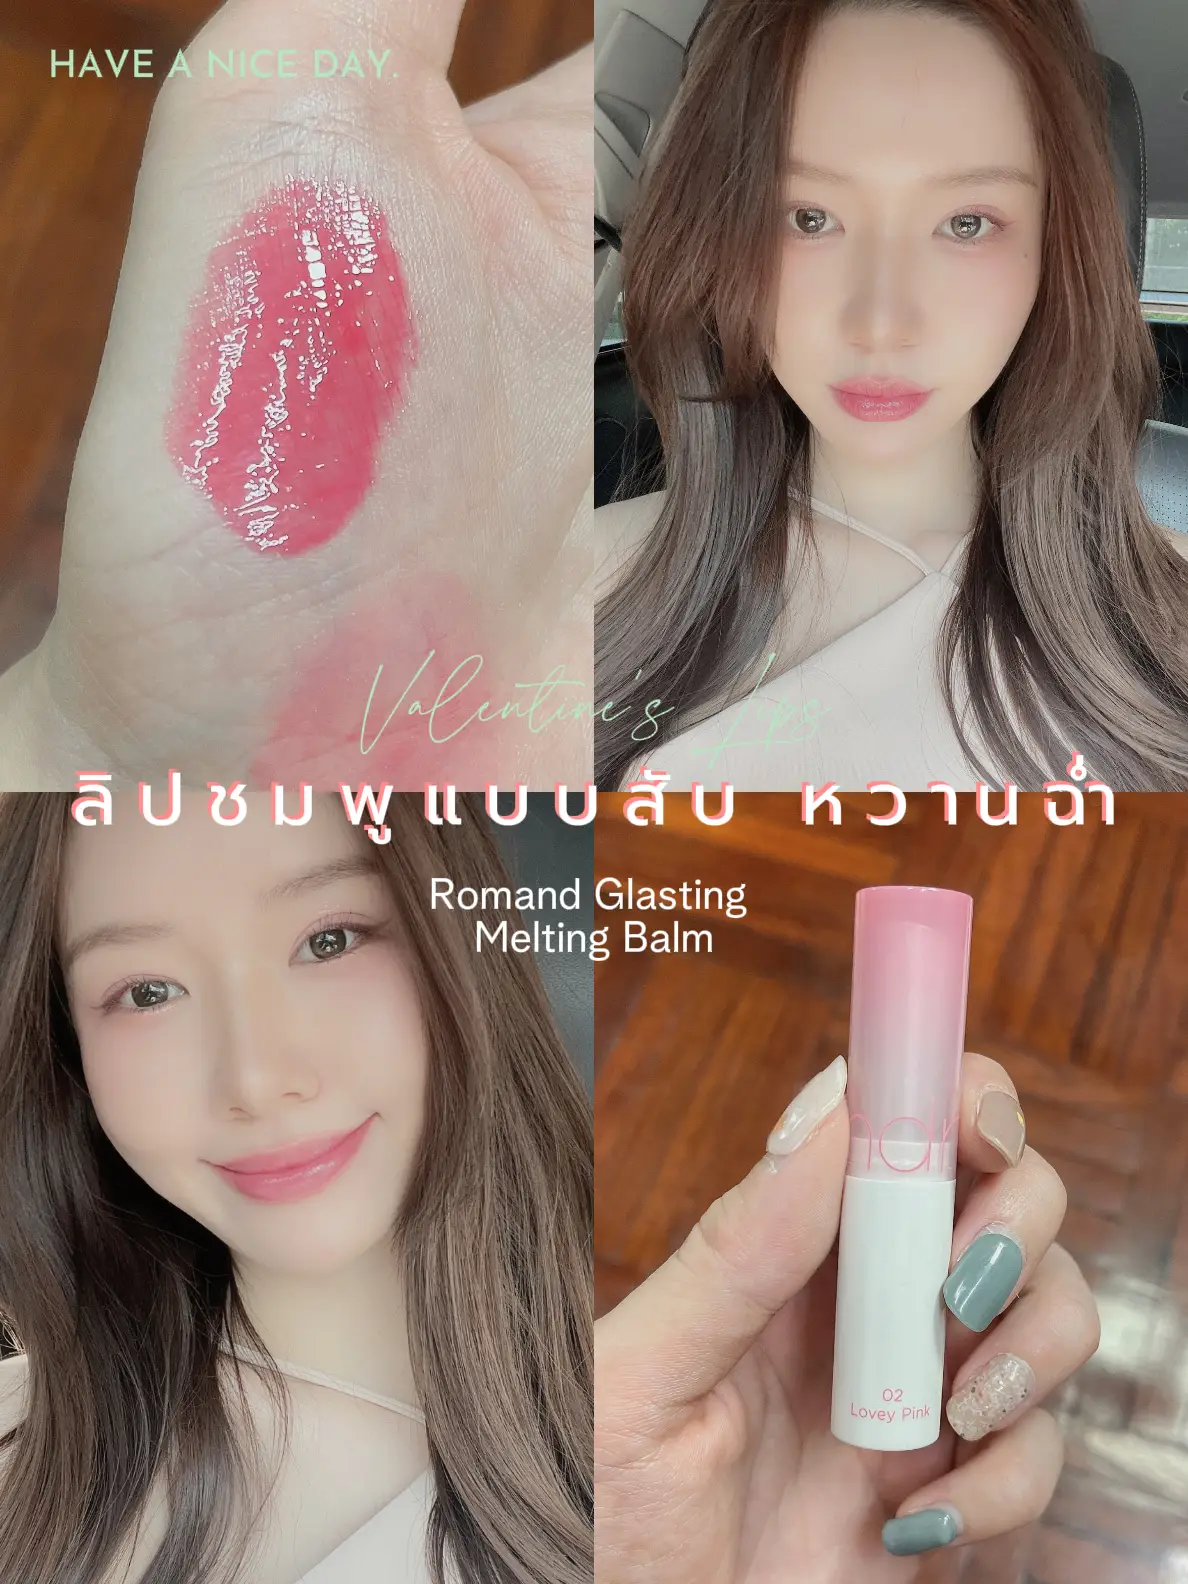 Very Juicy Lip Pink Romand Glasting Balm 02 Lovey Pink, Gallery posted by  Jueqmolpan